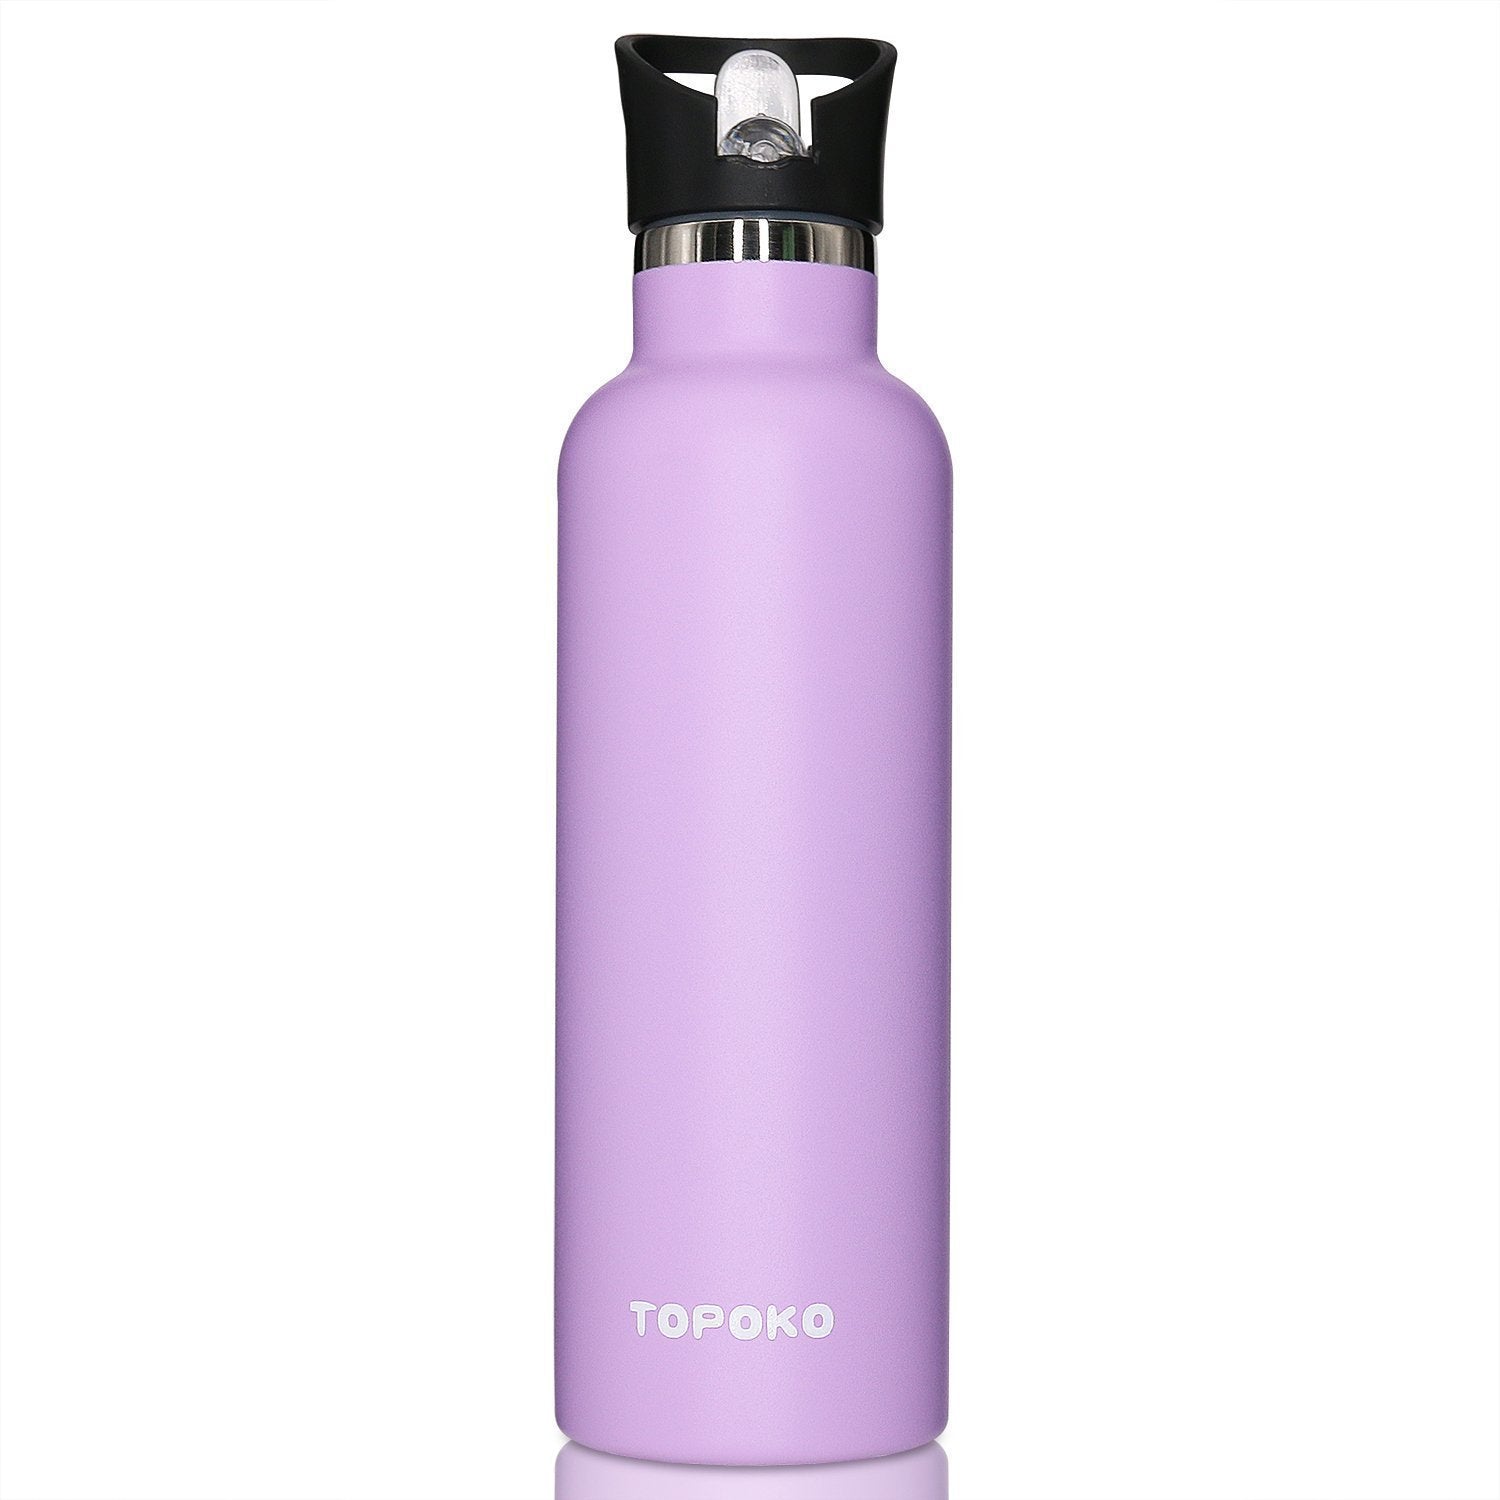 TOPOKO Top Quality Colored Non-Rusty Stainless Steel Vacuum Water Bottle Double Wall Insulated Thermos, Sports Hike Travel, Leak